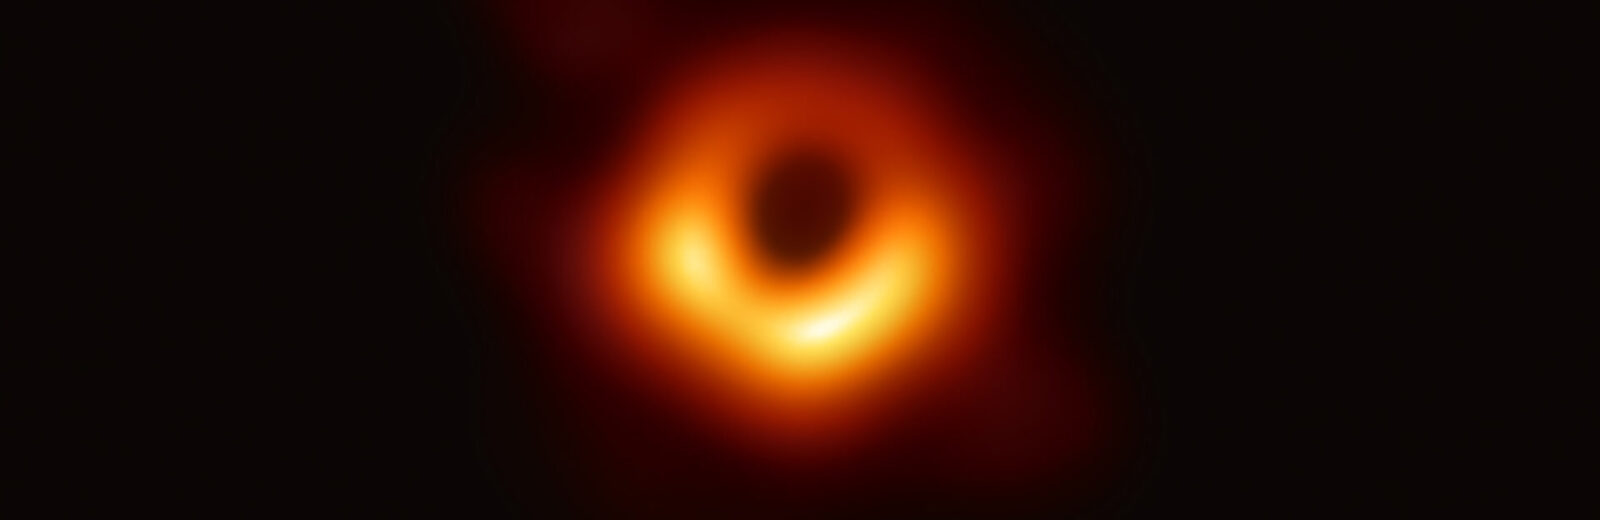 Say cheese, black hole – you’re on camera!